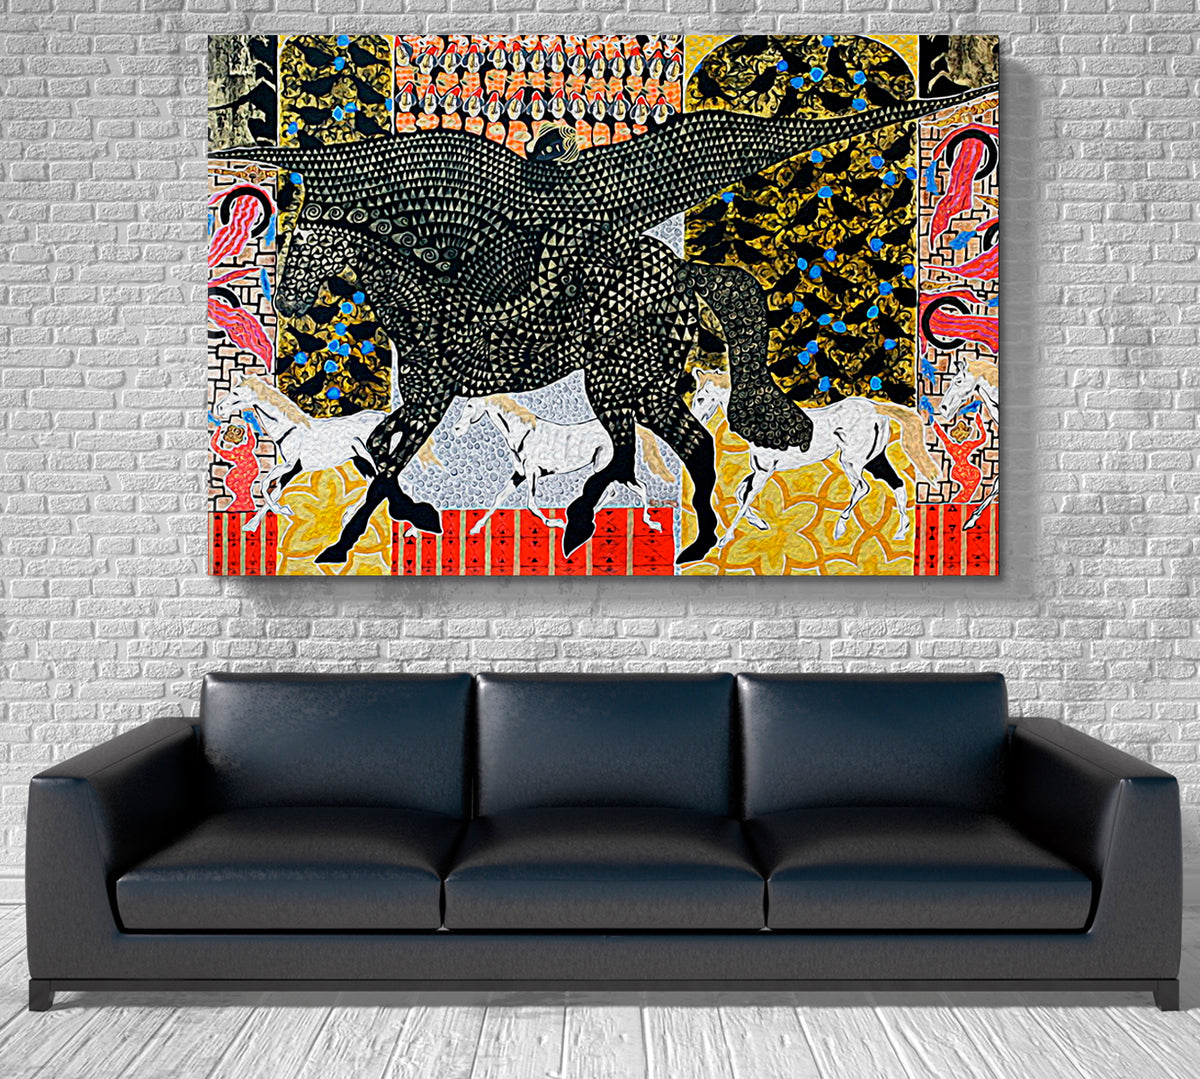 PEGASUS Wings Horse Abstract Geometric Figurative Art Collage Contemporary Art Artesty 1 panel 24" x 16" 